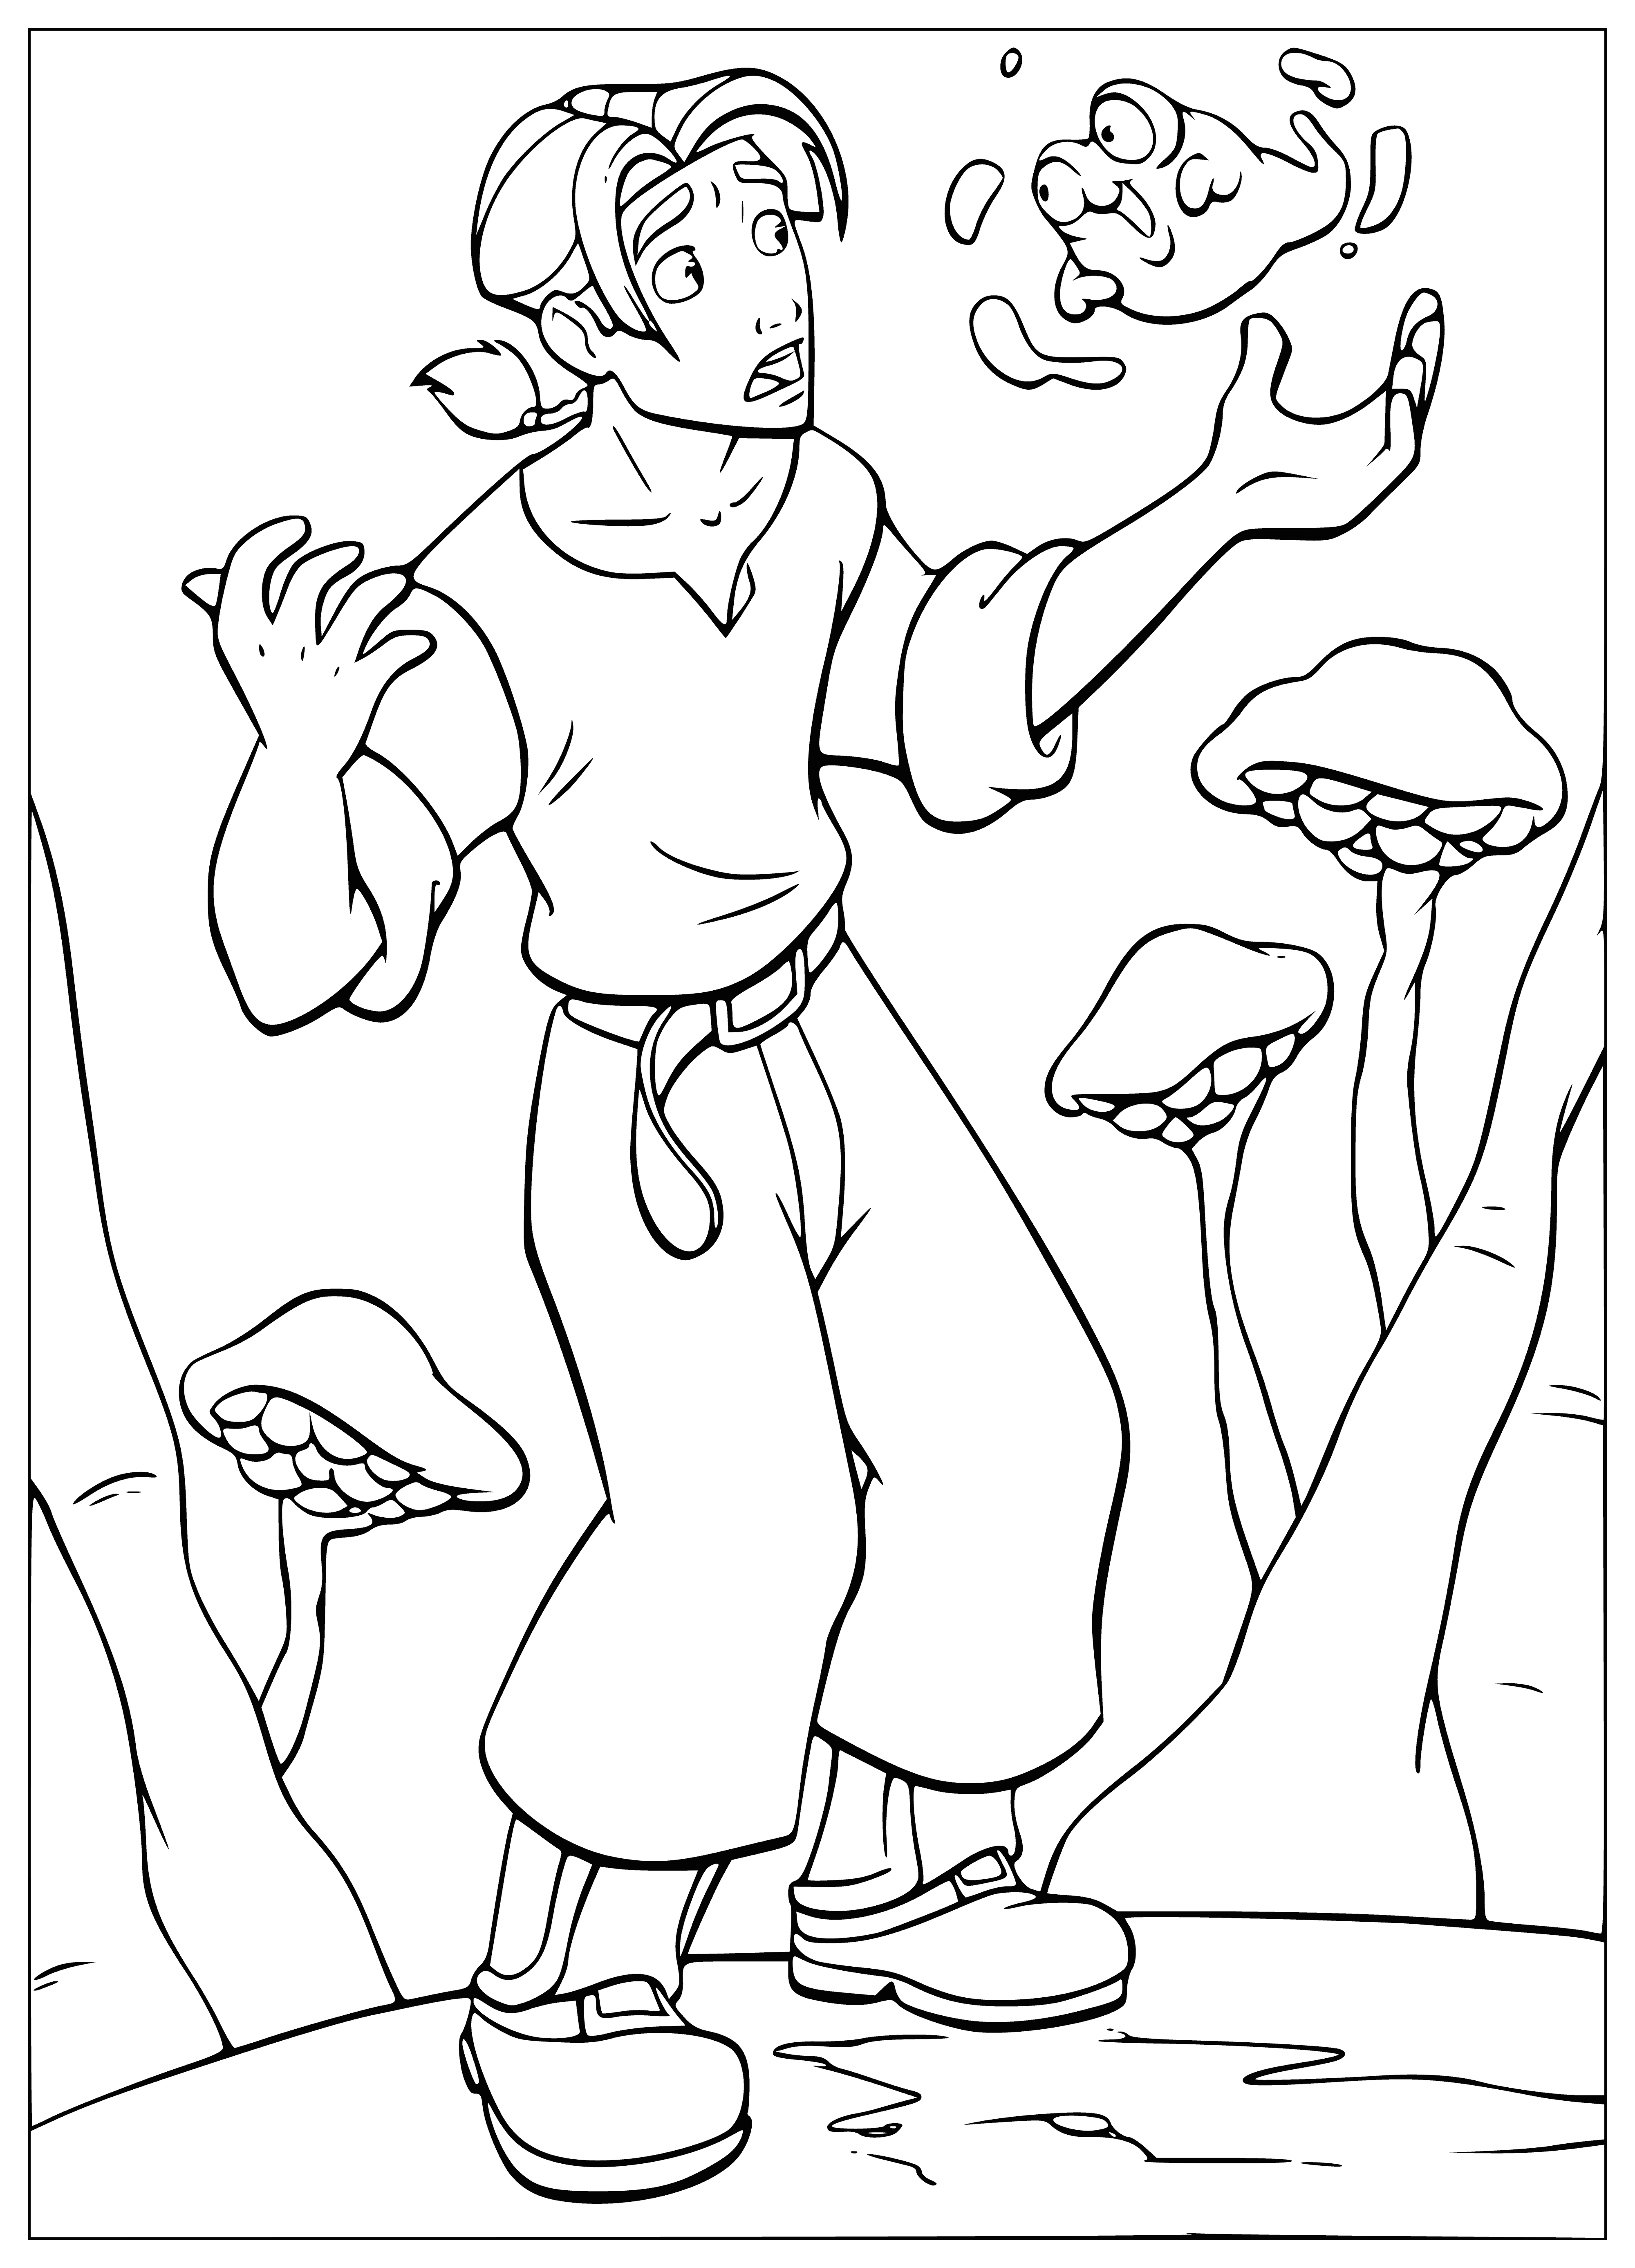 coloring page: Mysterious darkroom filled with treasure, guarded by a black & white morph wearing a map around its neck, and various weapons present.